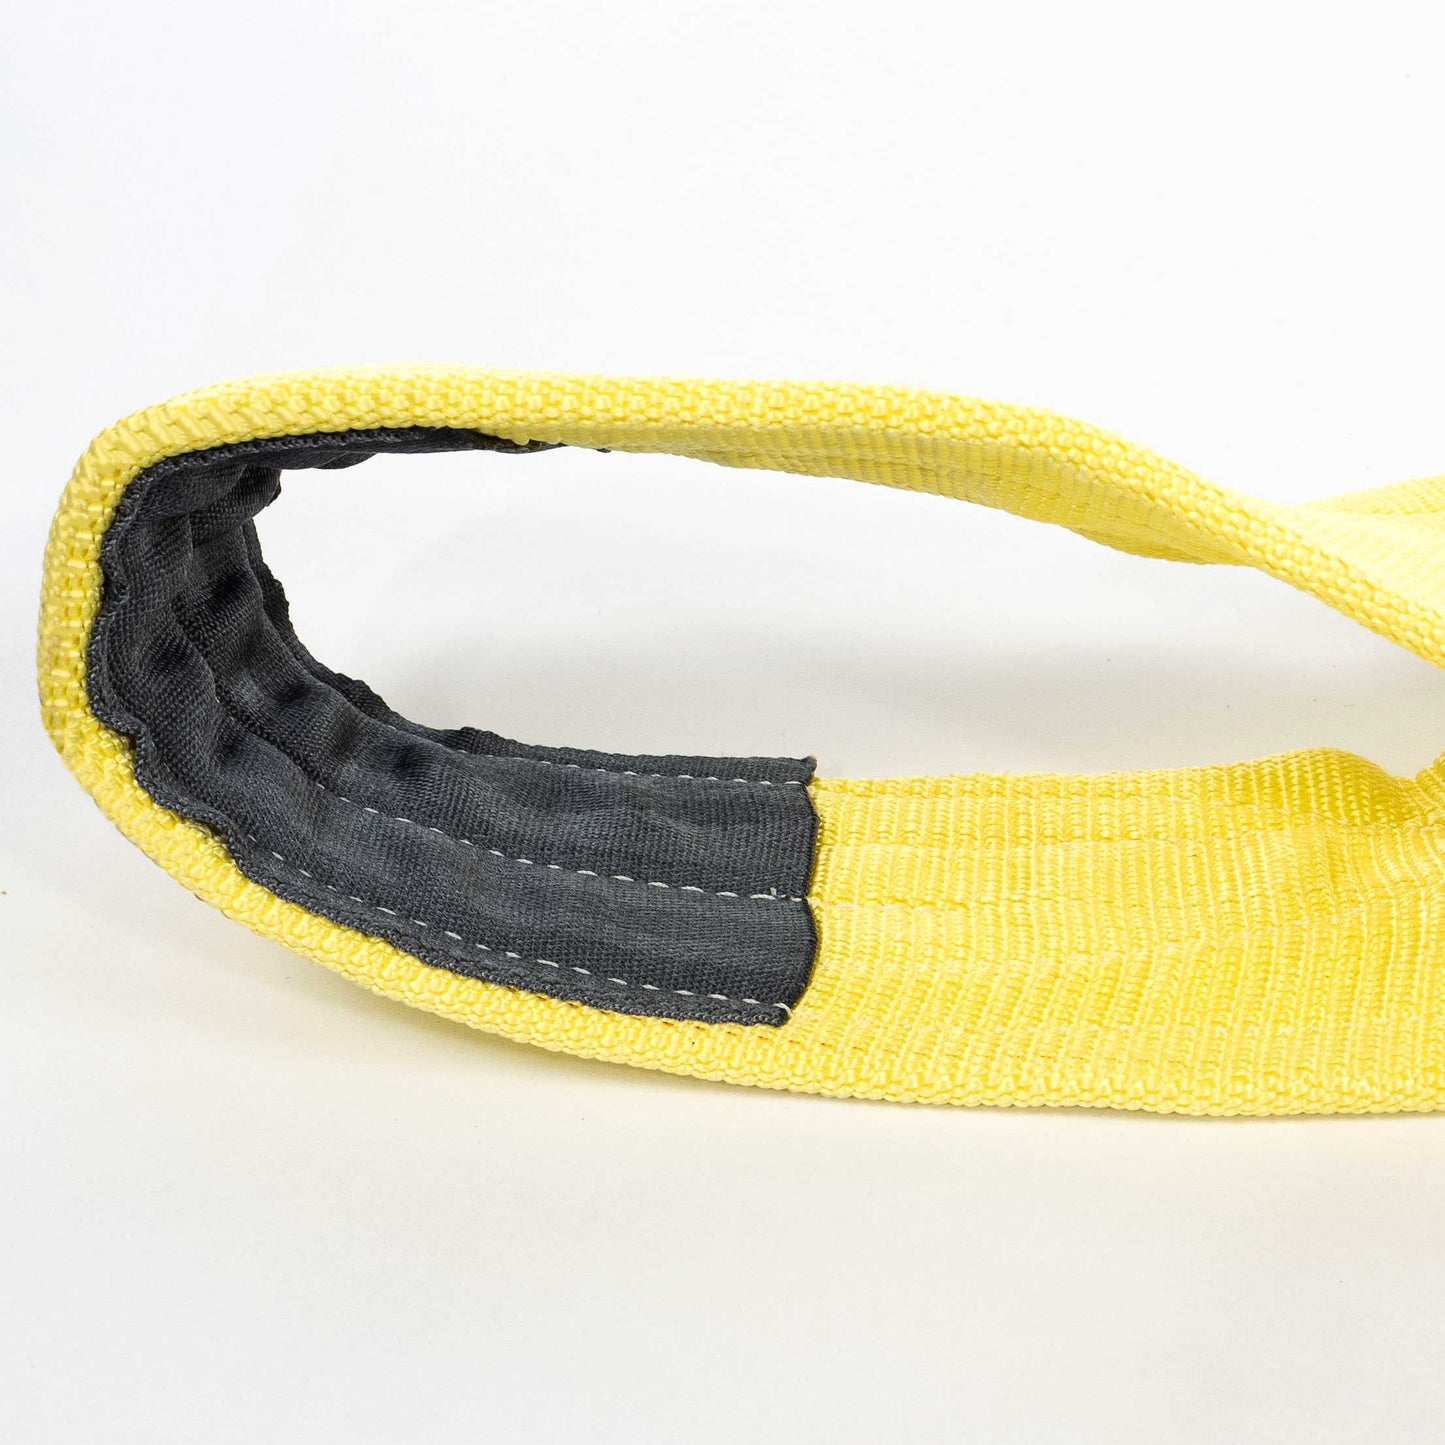 12" x 30' Heavy Duty Recovery Strap with Reinforced Cordura Eyes - 2 Ply | 67,250 WLL